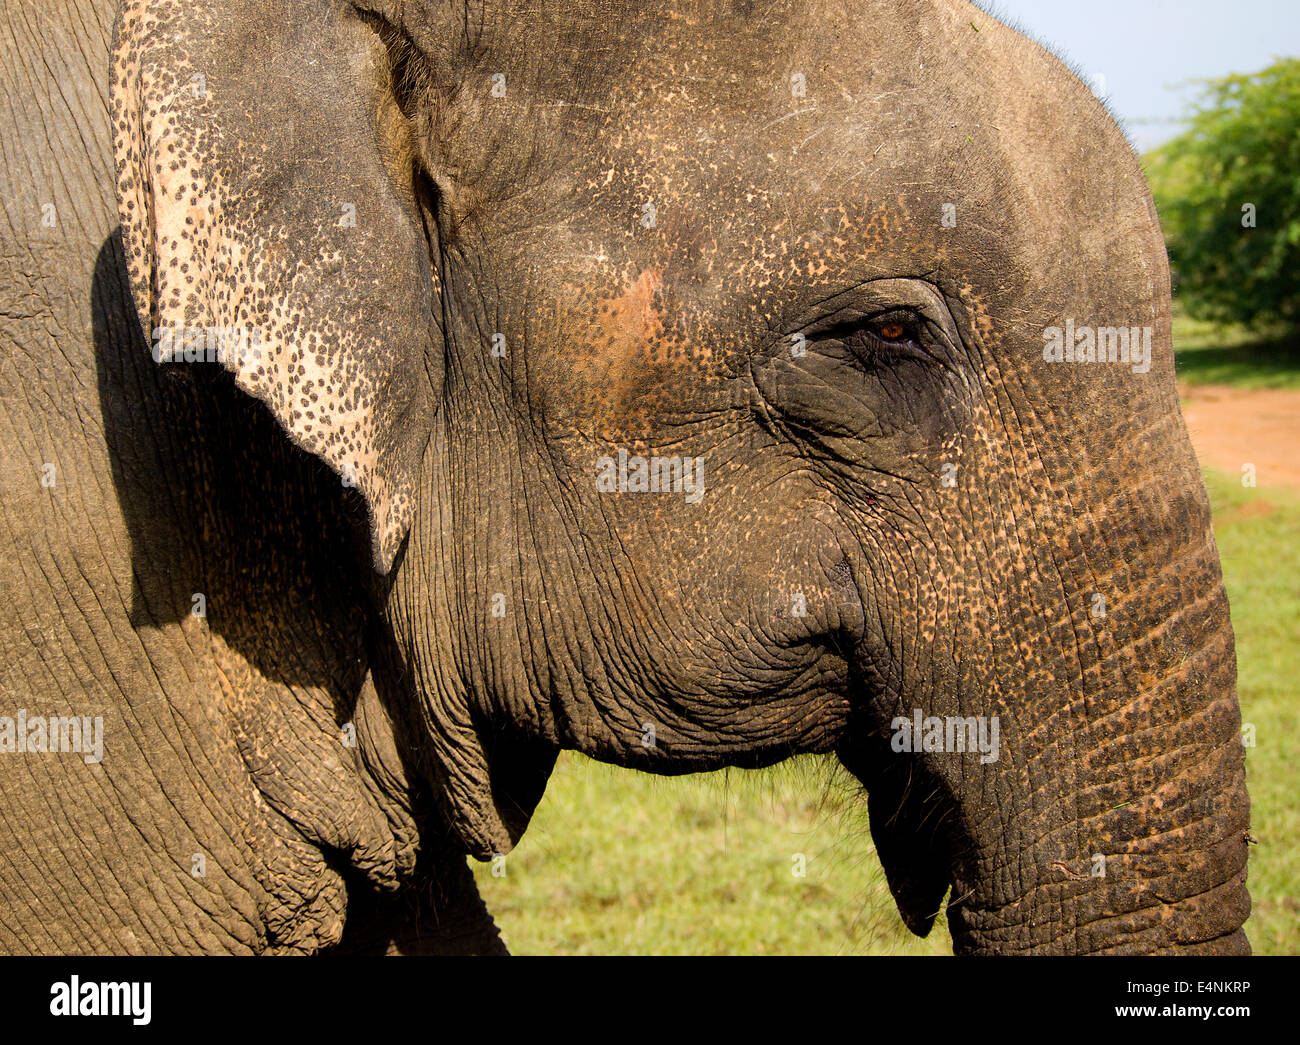 Closeup of the eye of an Indian elephant Stock Photo